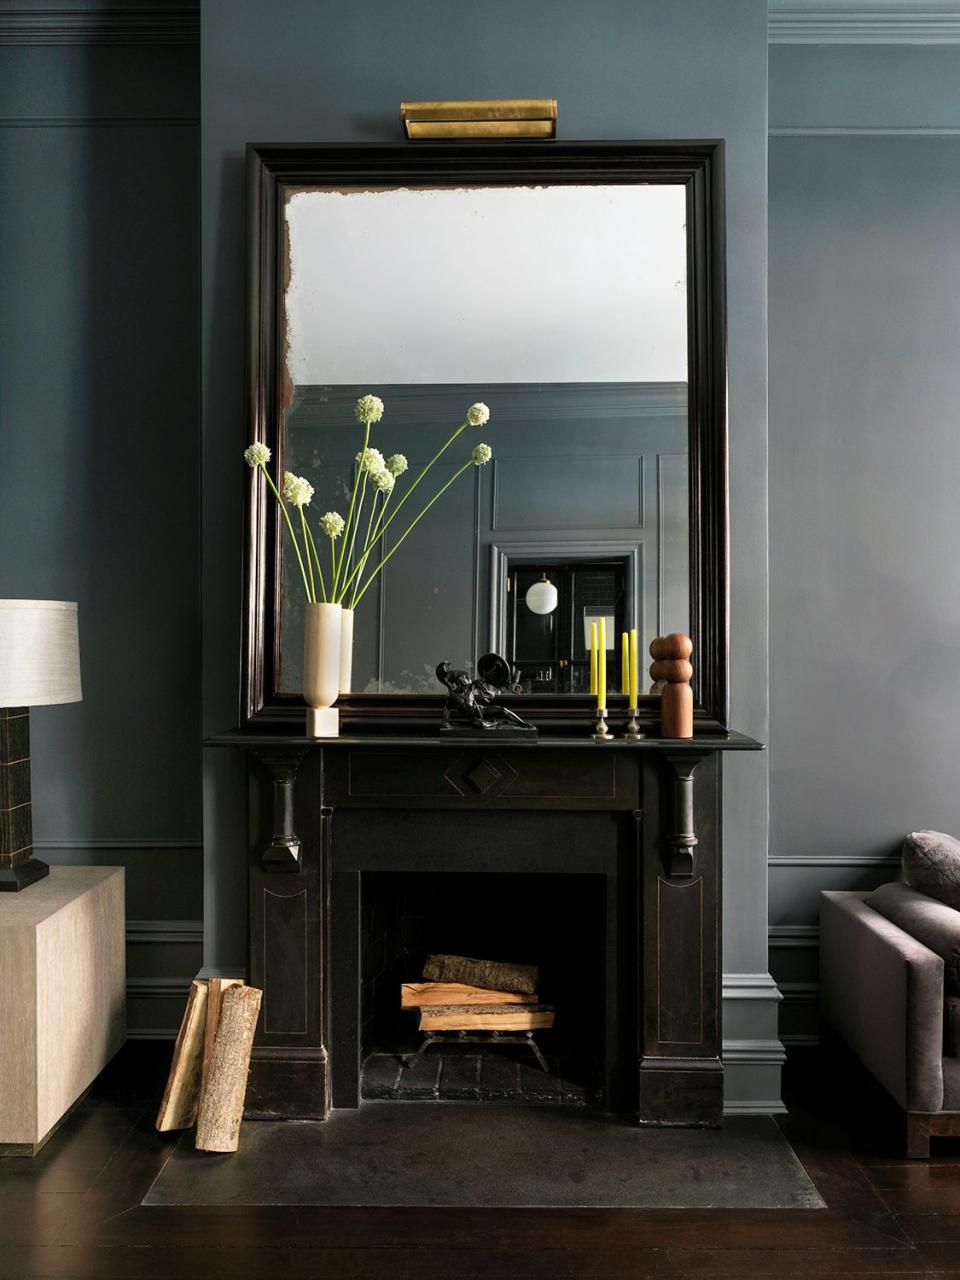 14 Mesmerizing Living Room Mirror Ideas - The Best Living Room Mirrors  Online